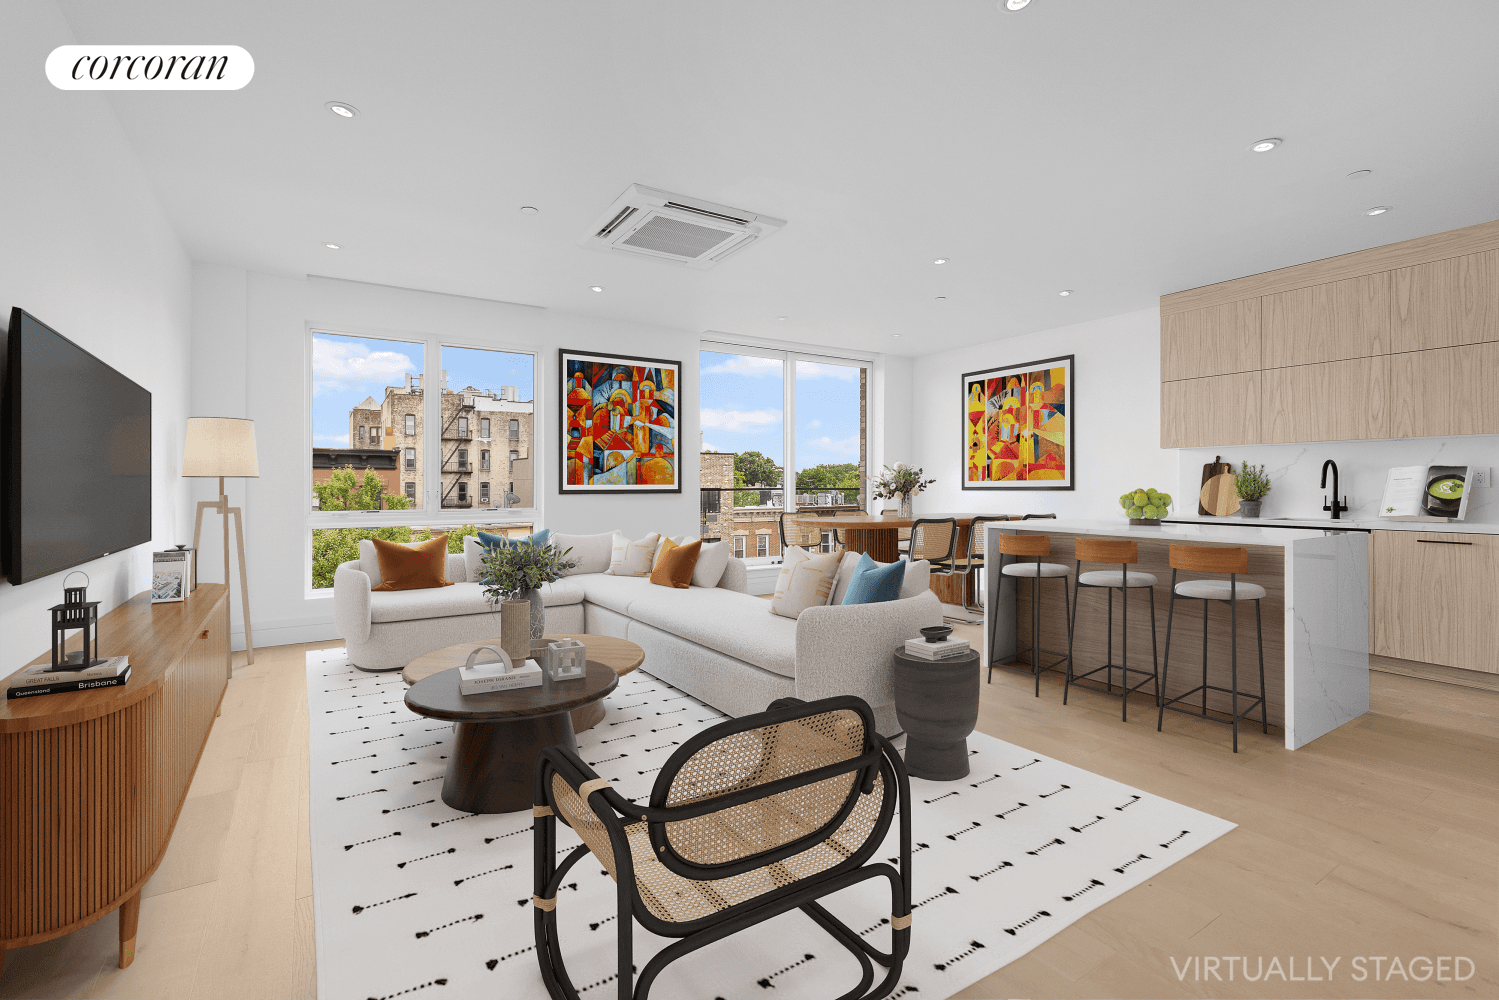 Apartment 4 at 499 Van Buren Street is a floor through two bedroom with two baths, two balconies, and an internal staircase leading to a large private roof terrace.